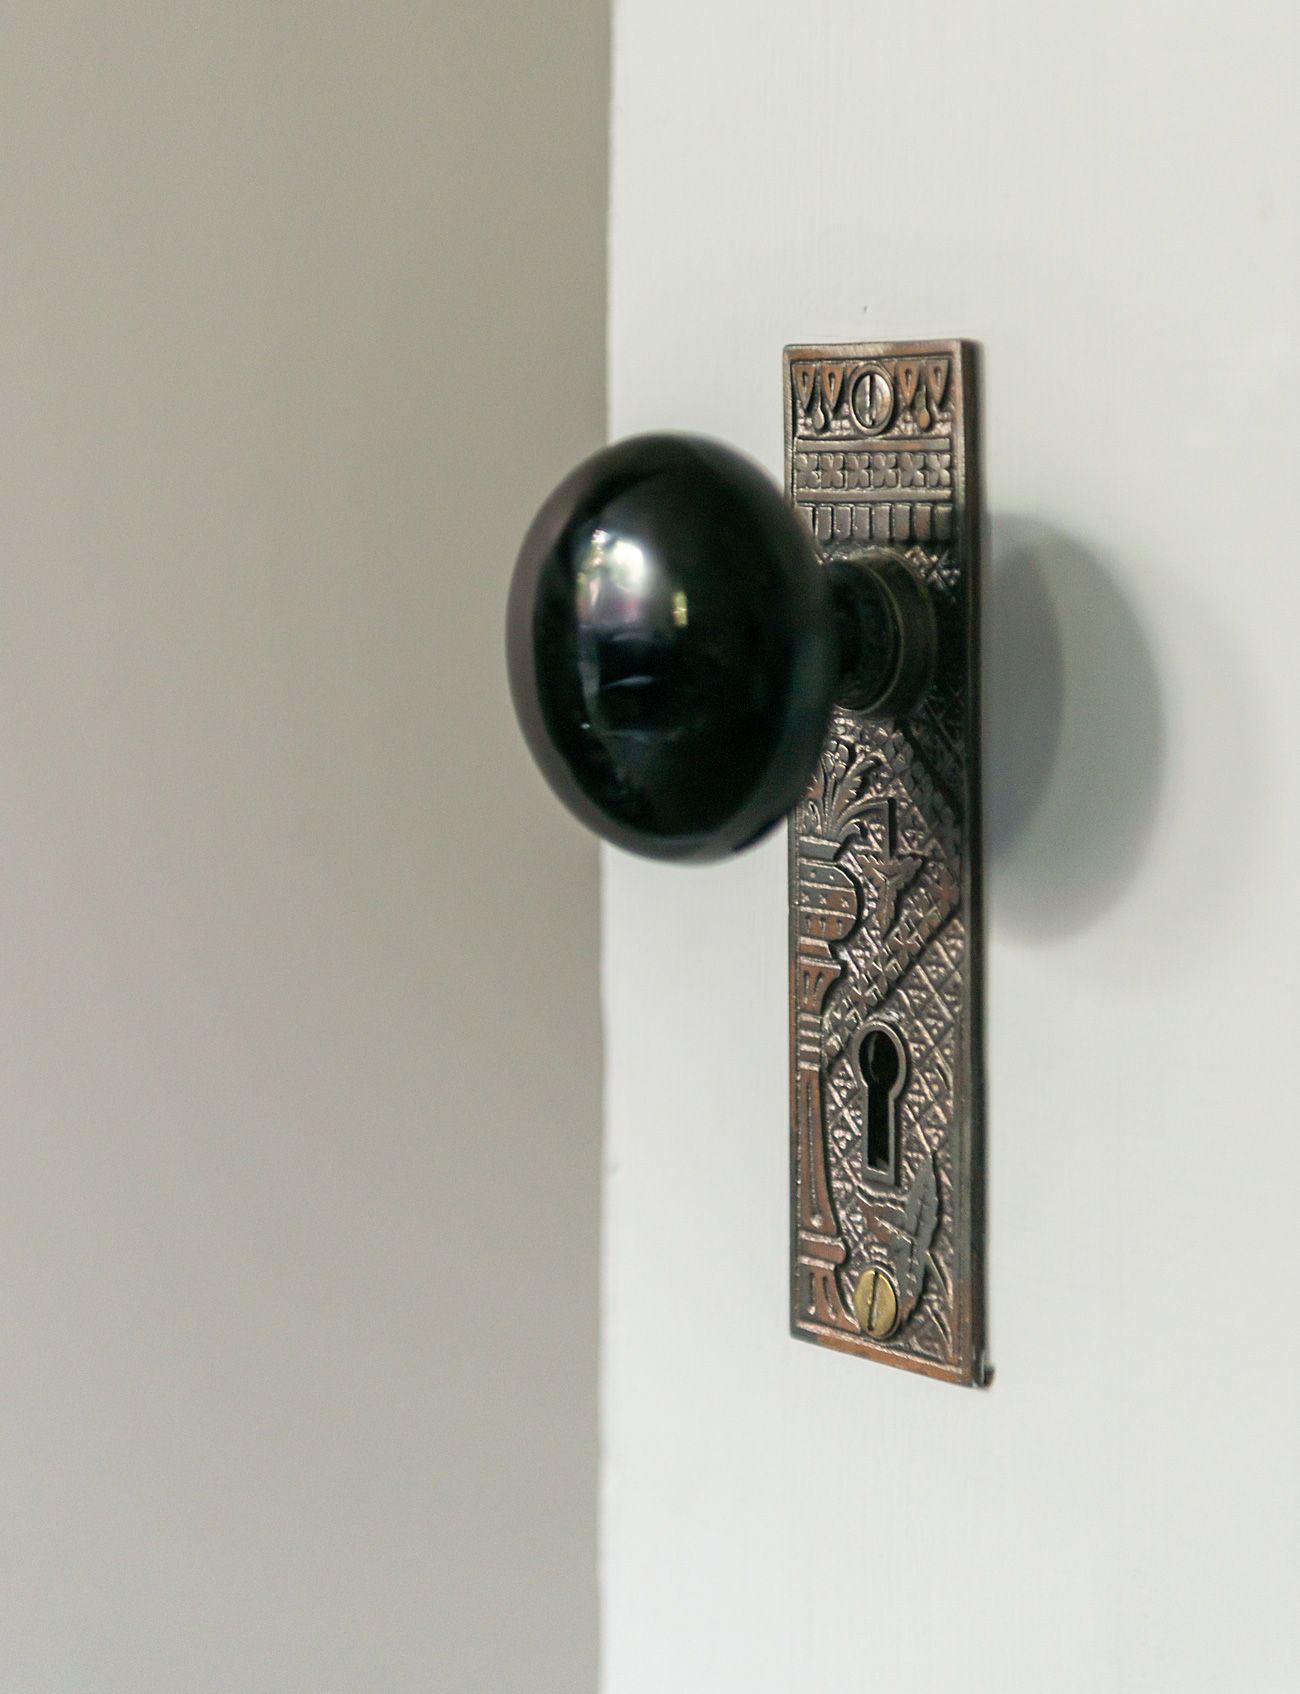 Every William Morris-style grate, hinge and mortise lock was restored.